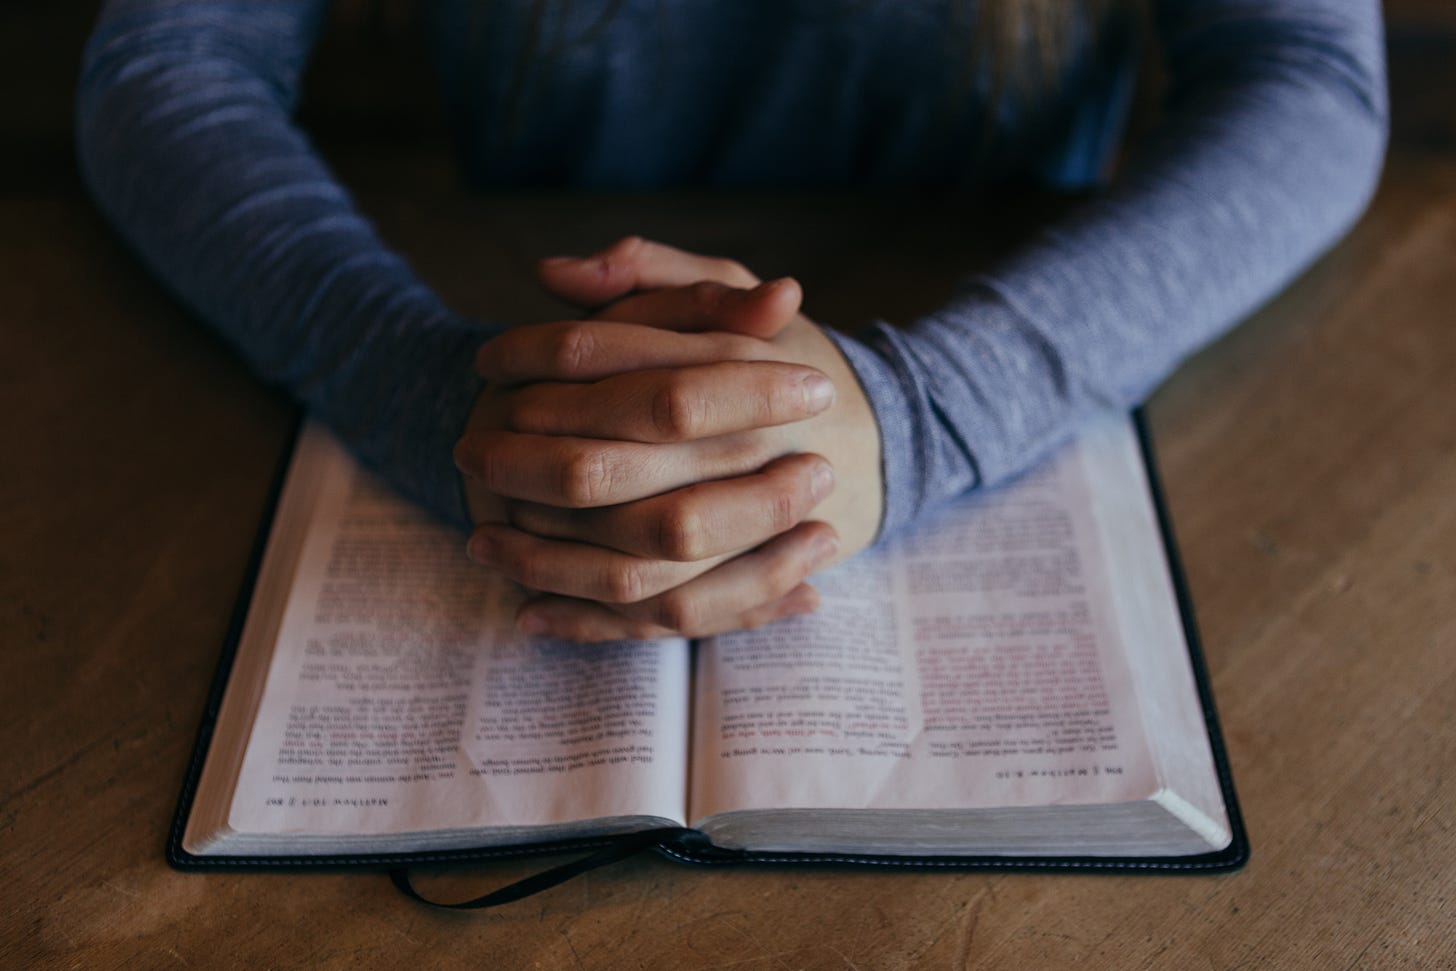 Clasped hands upon an open Bible as a gesture of praying